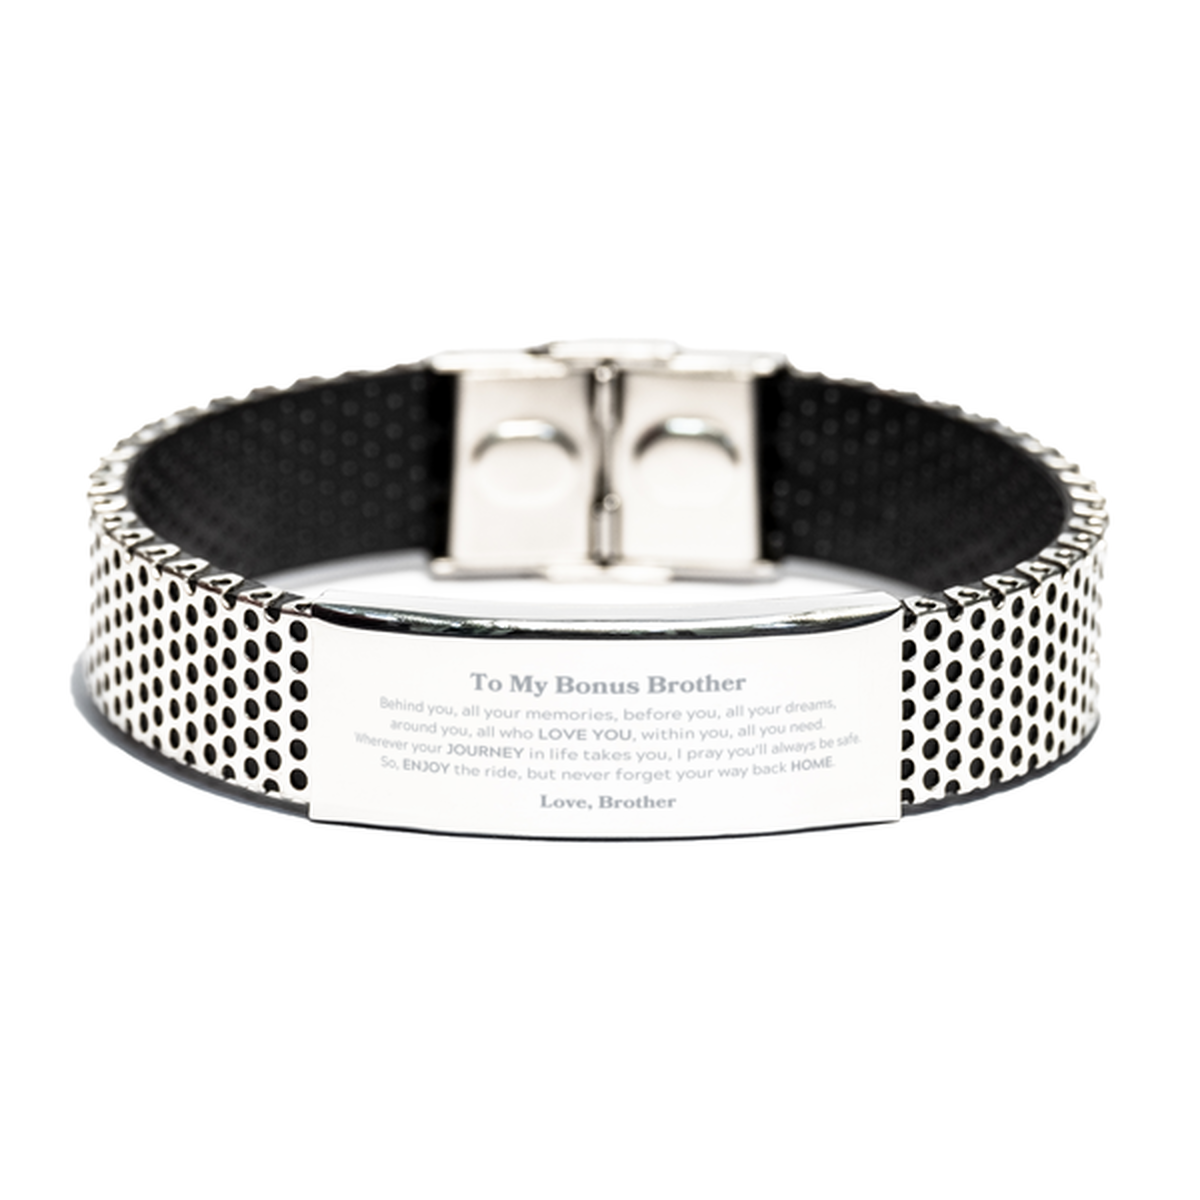 To My Bonus Brother Graduation Gifts from Brother, Bonus Brother Stainless Steel Bracelet Christmas Birthday Gifts for Bonus Brother Behind you, all your memories, before you, all your dreams. Love, Brother